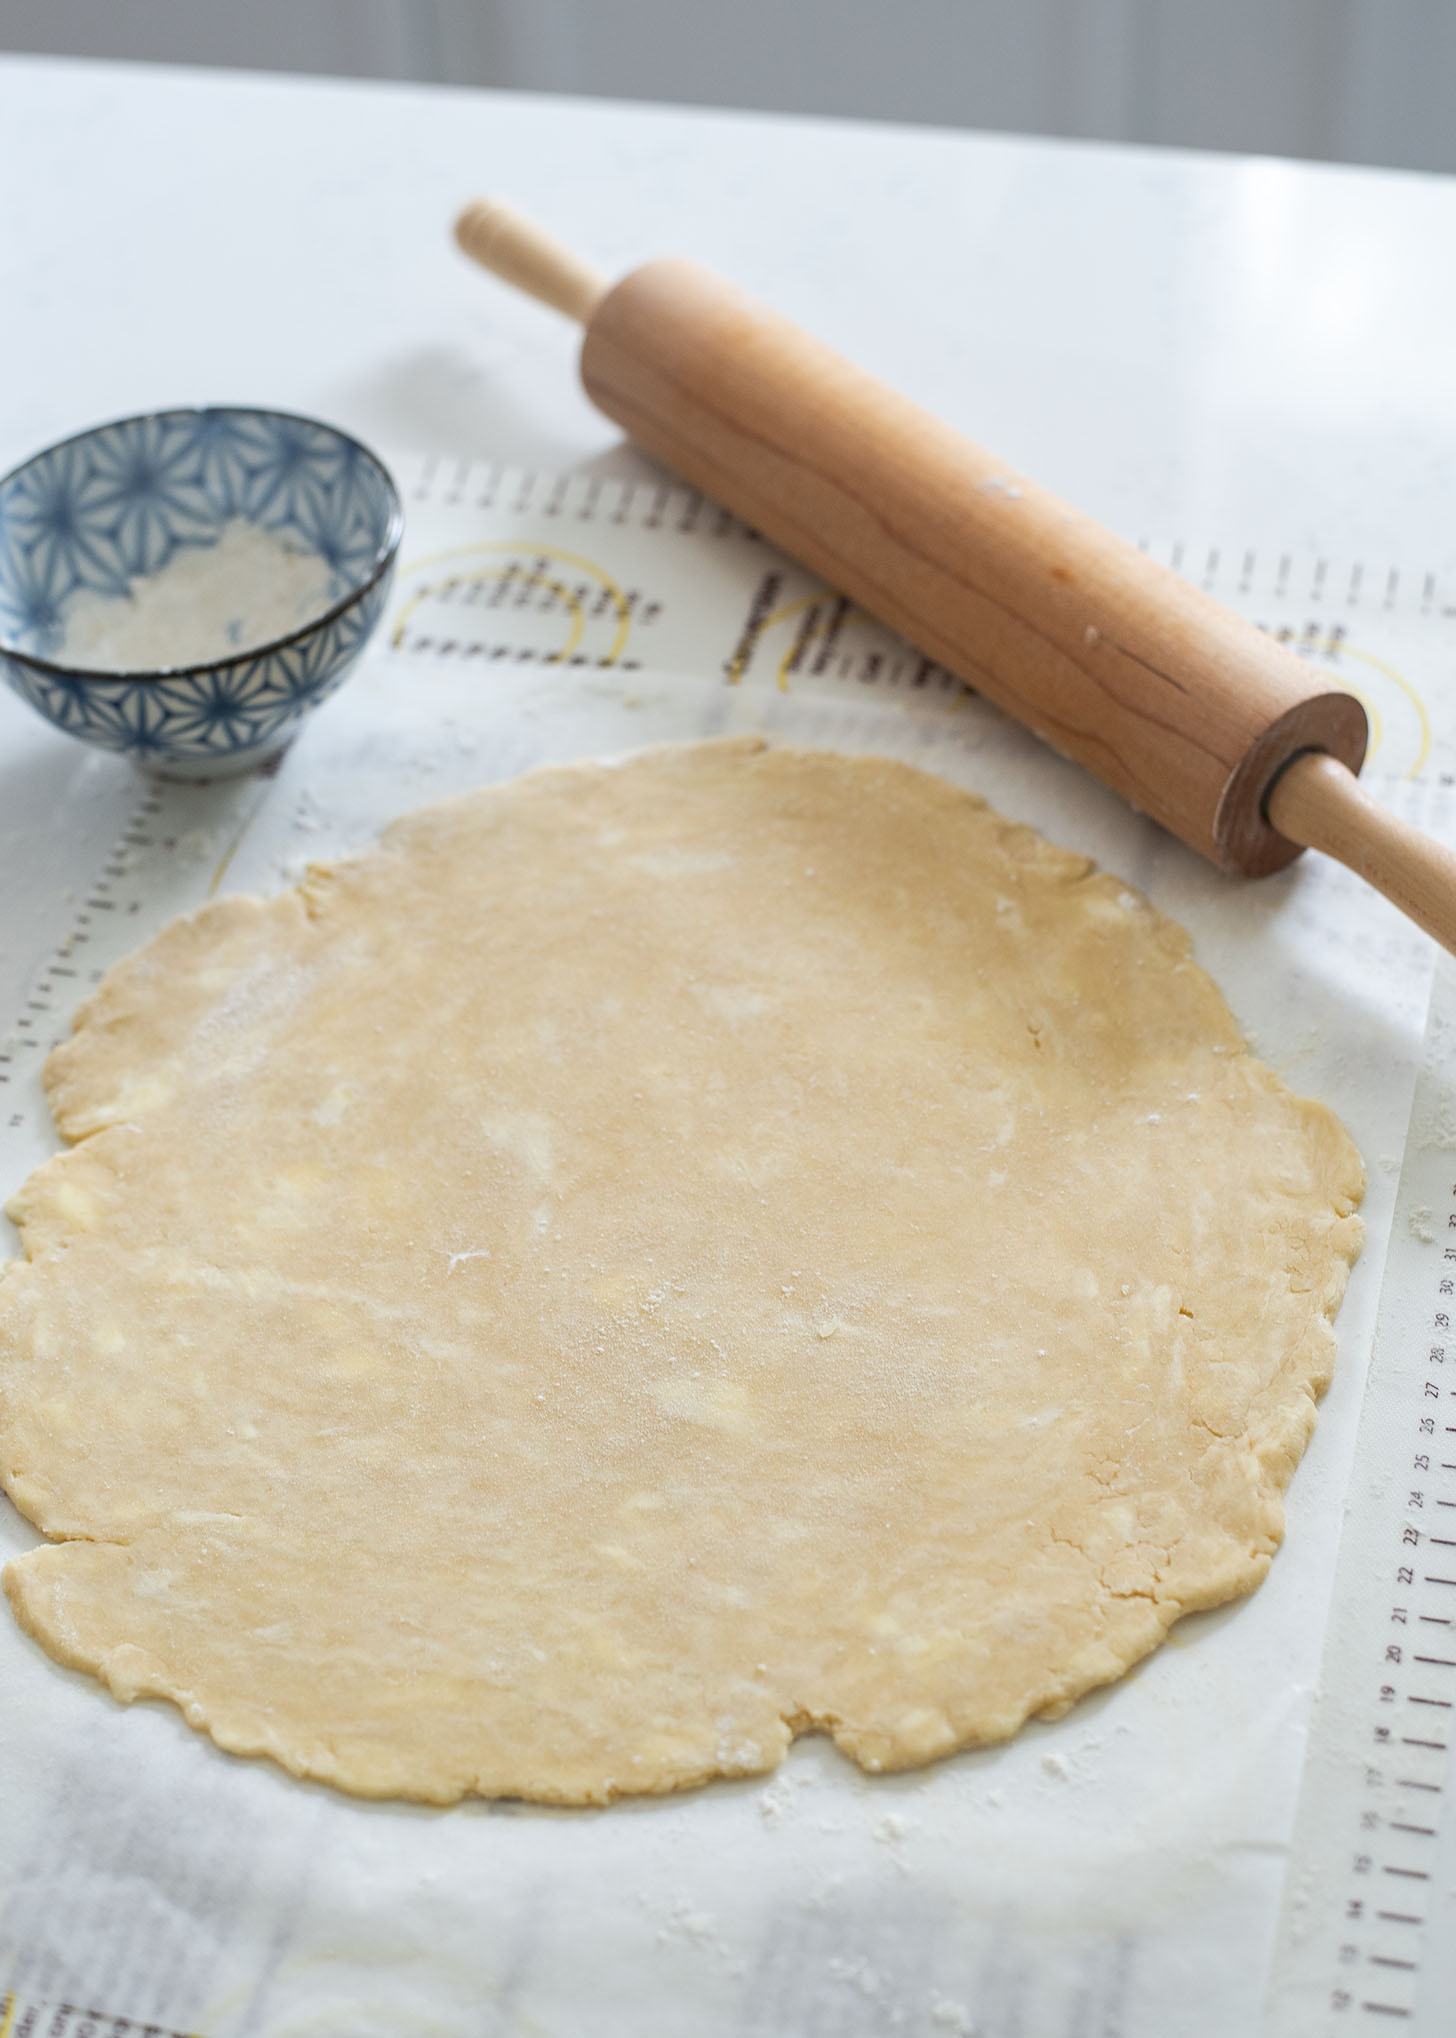 Homemade pie dough is rolled out with a rolling pin